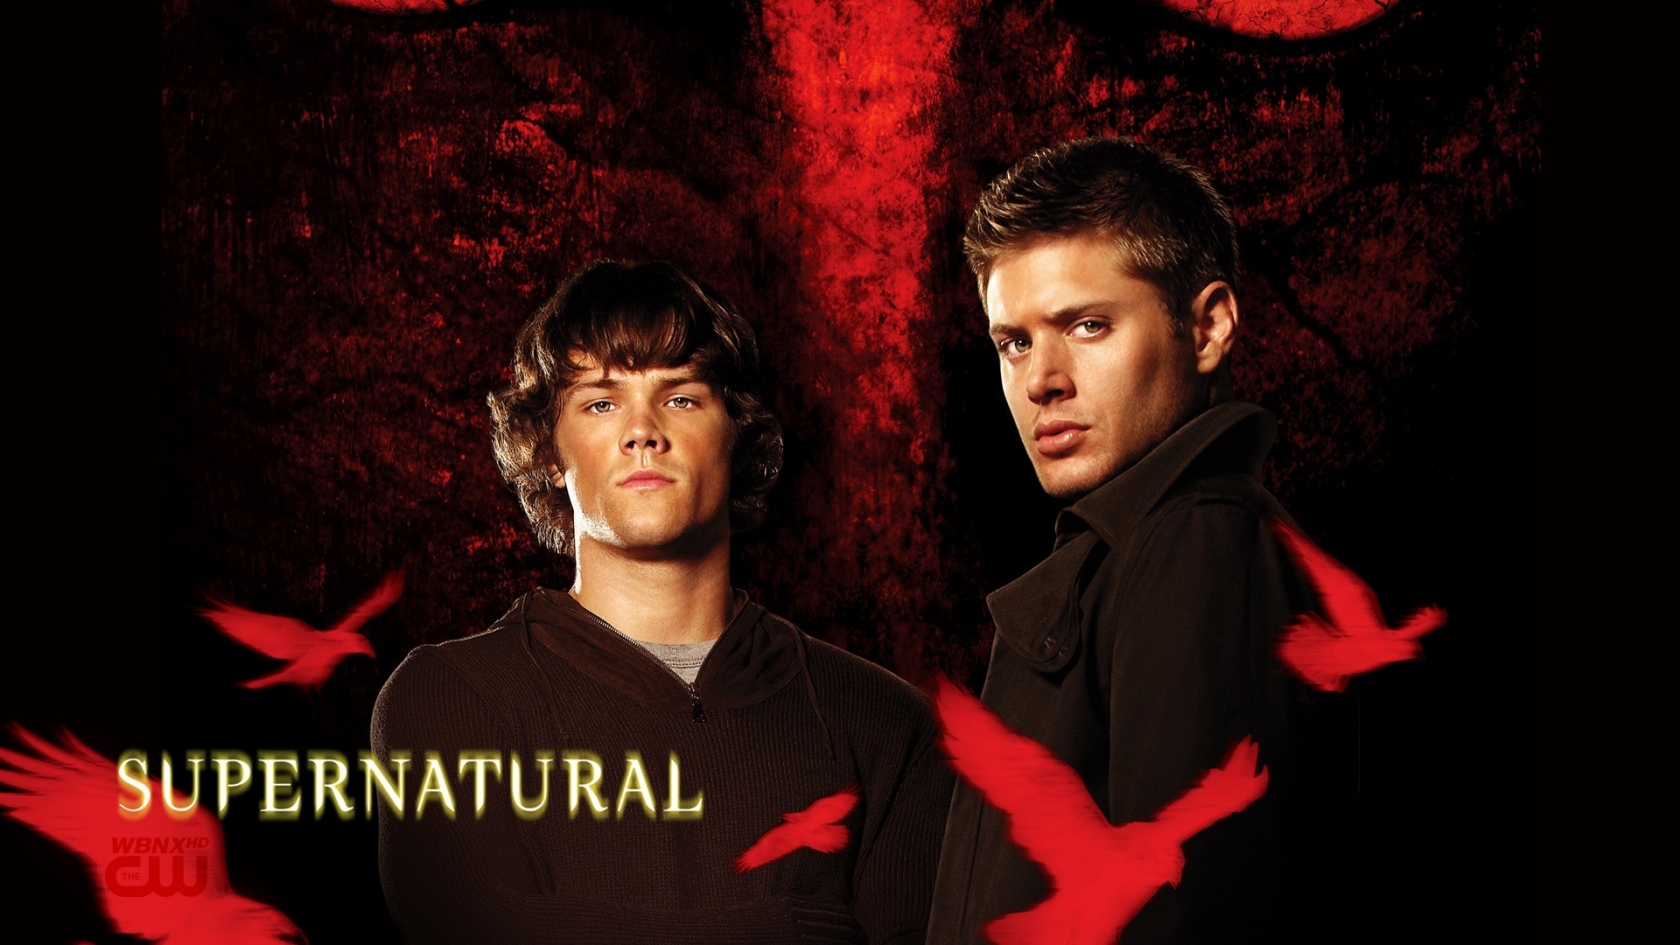 Supernatural Characters for 1680 x 945 HDTV resolution